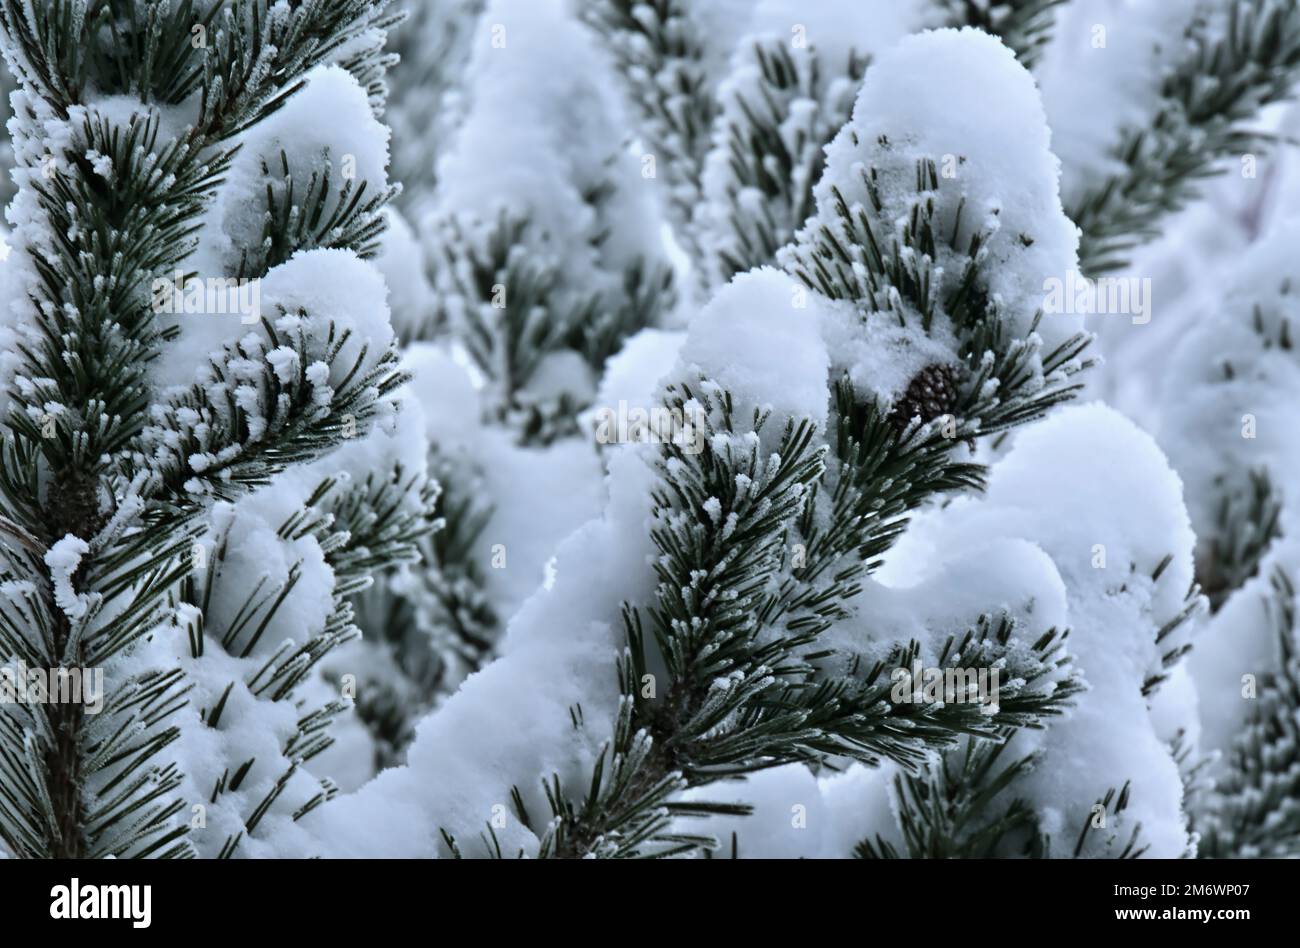 A horizontal image of a pine tree branch covered with snow and frost Stock Photo